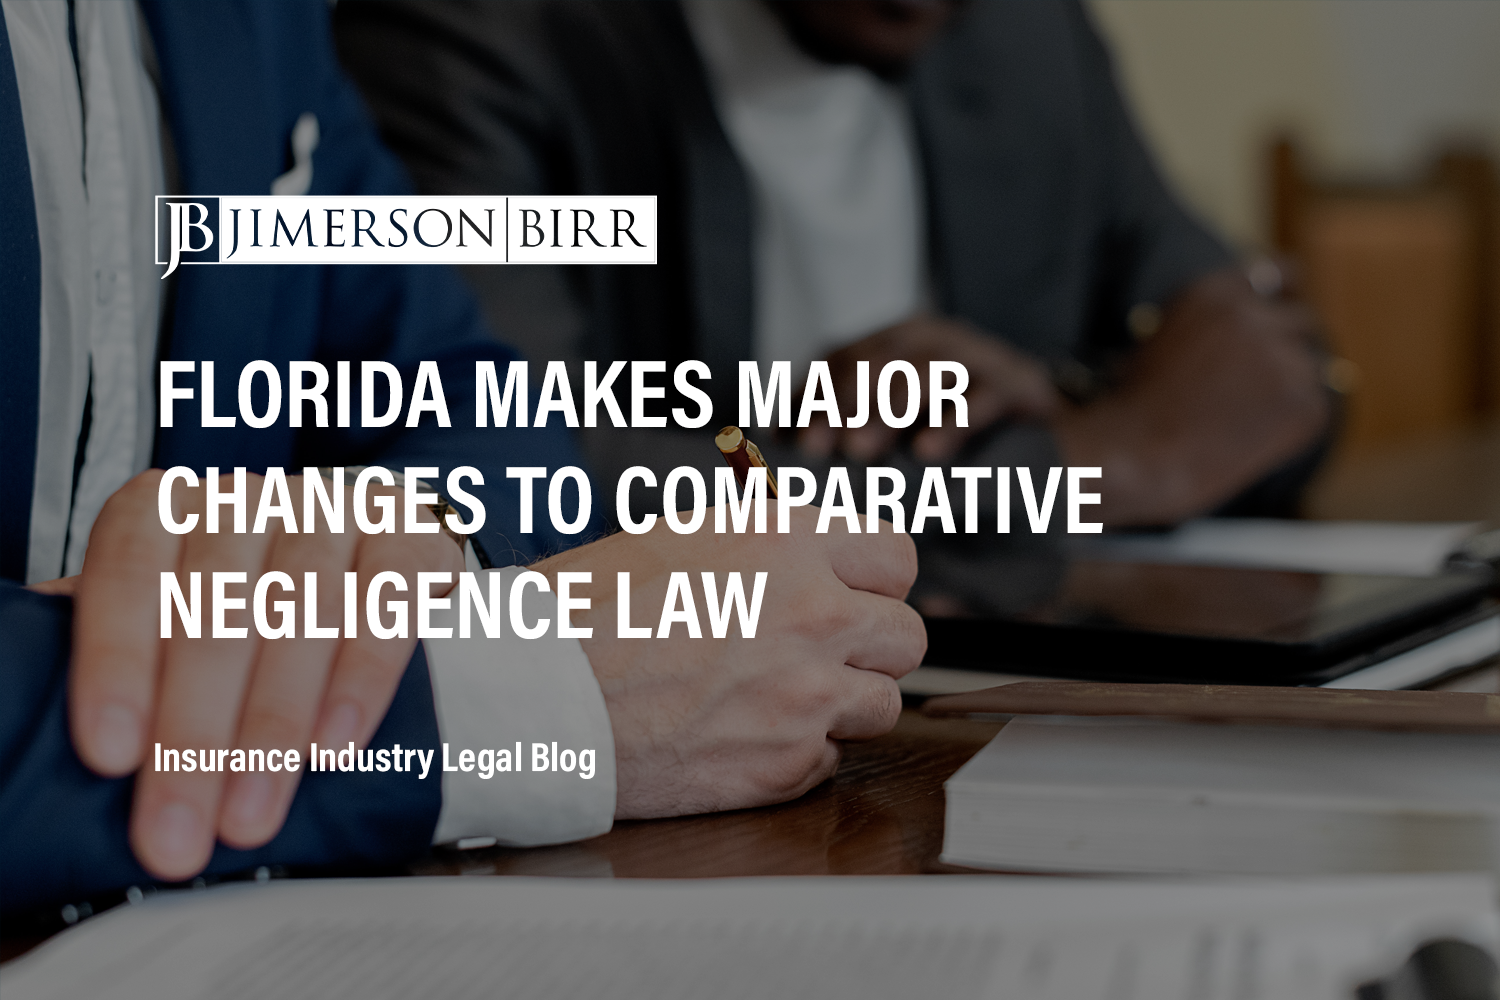 Florida Makes Major Changes to Comparative Negligence Law